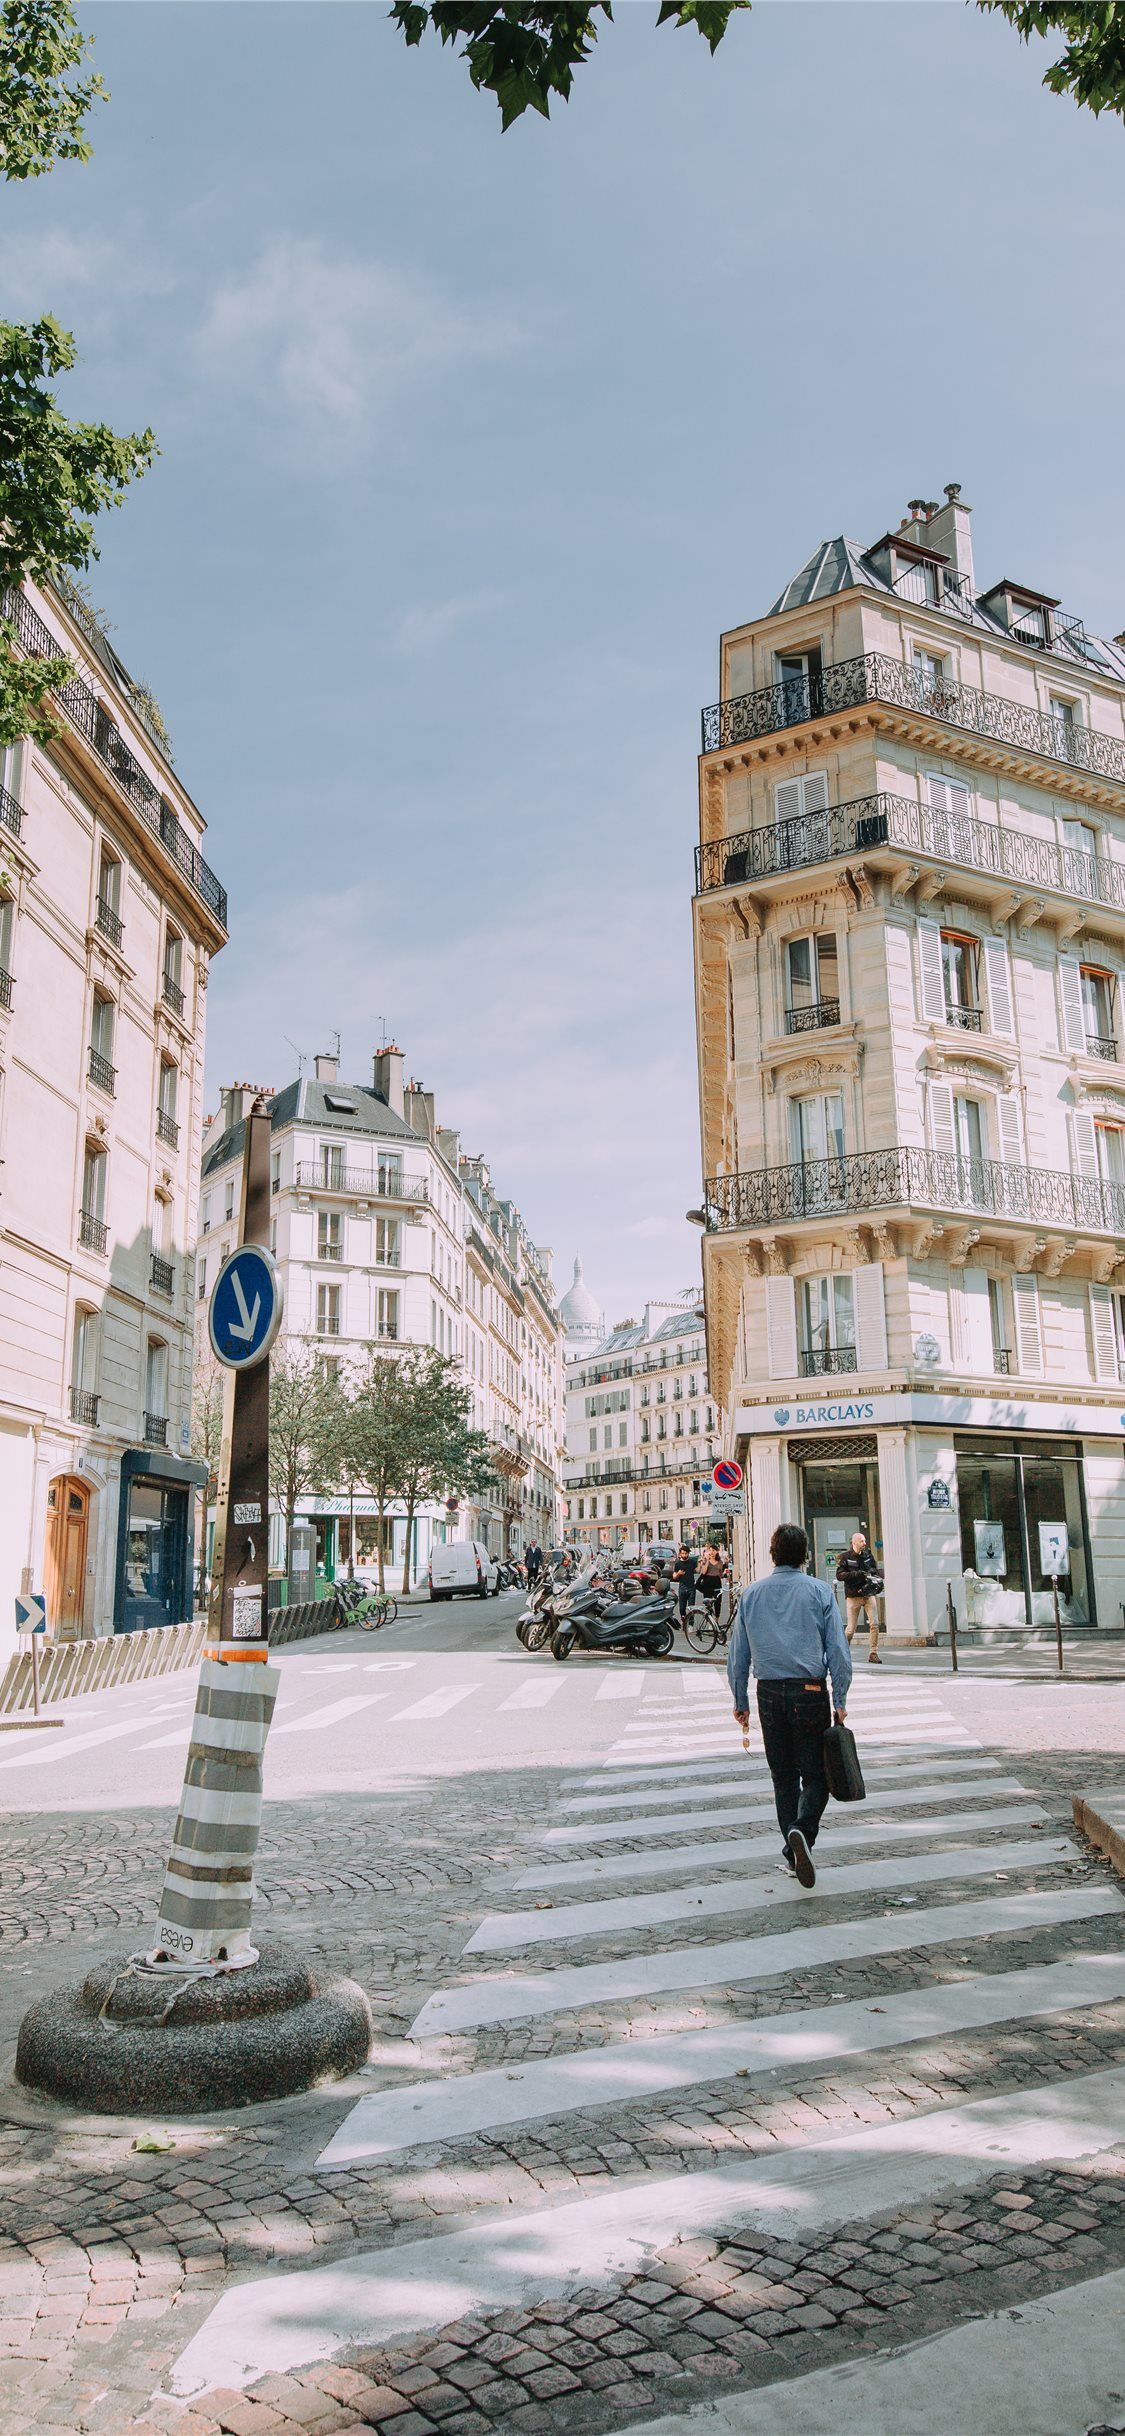 A man walking across the street in front of buildings - Paris, travel